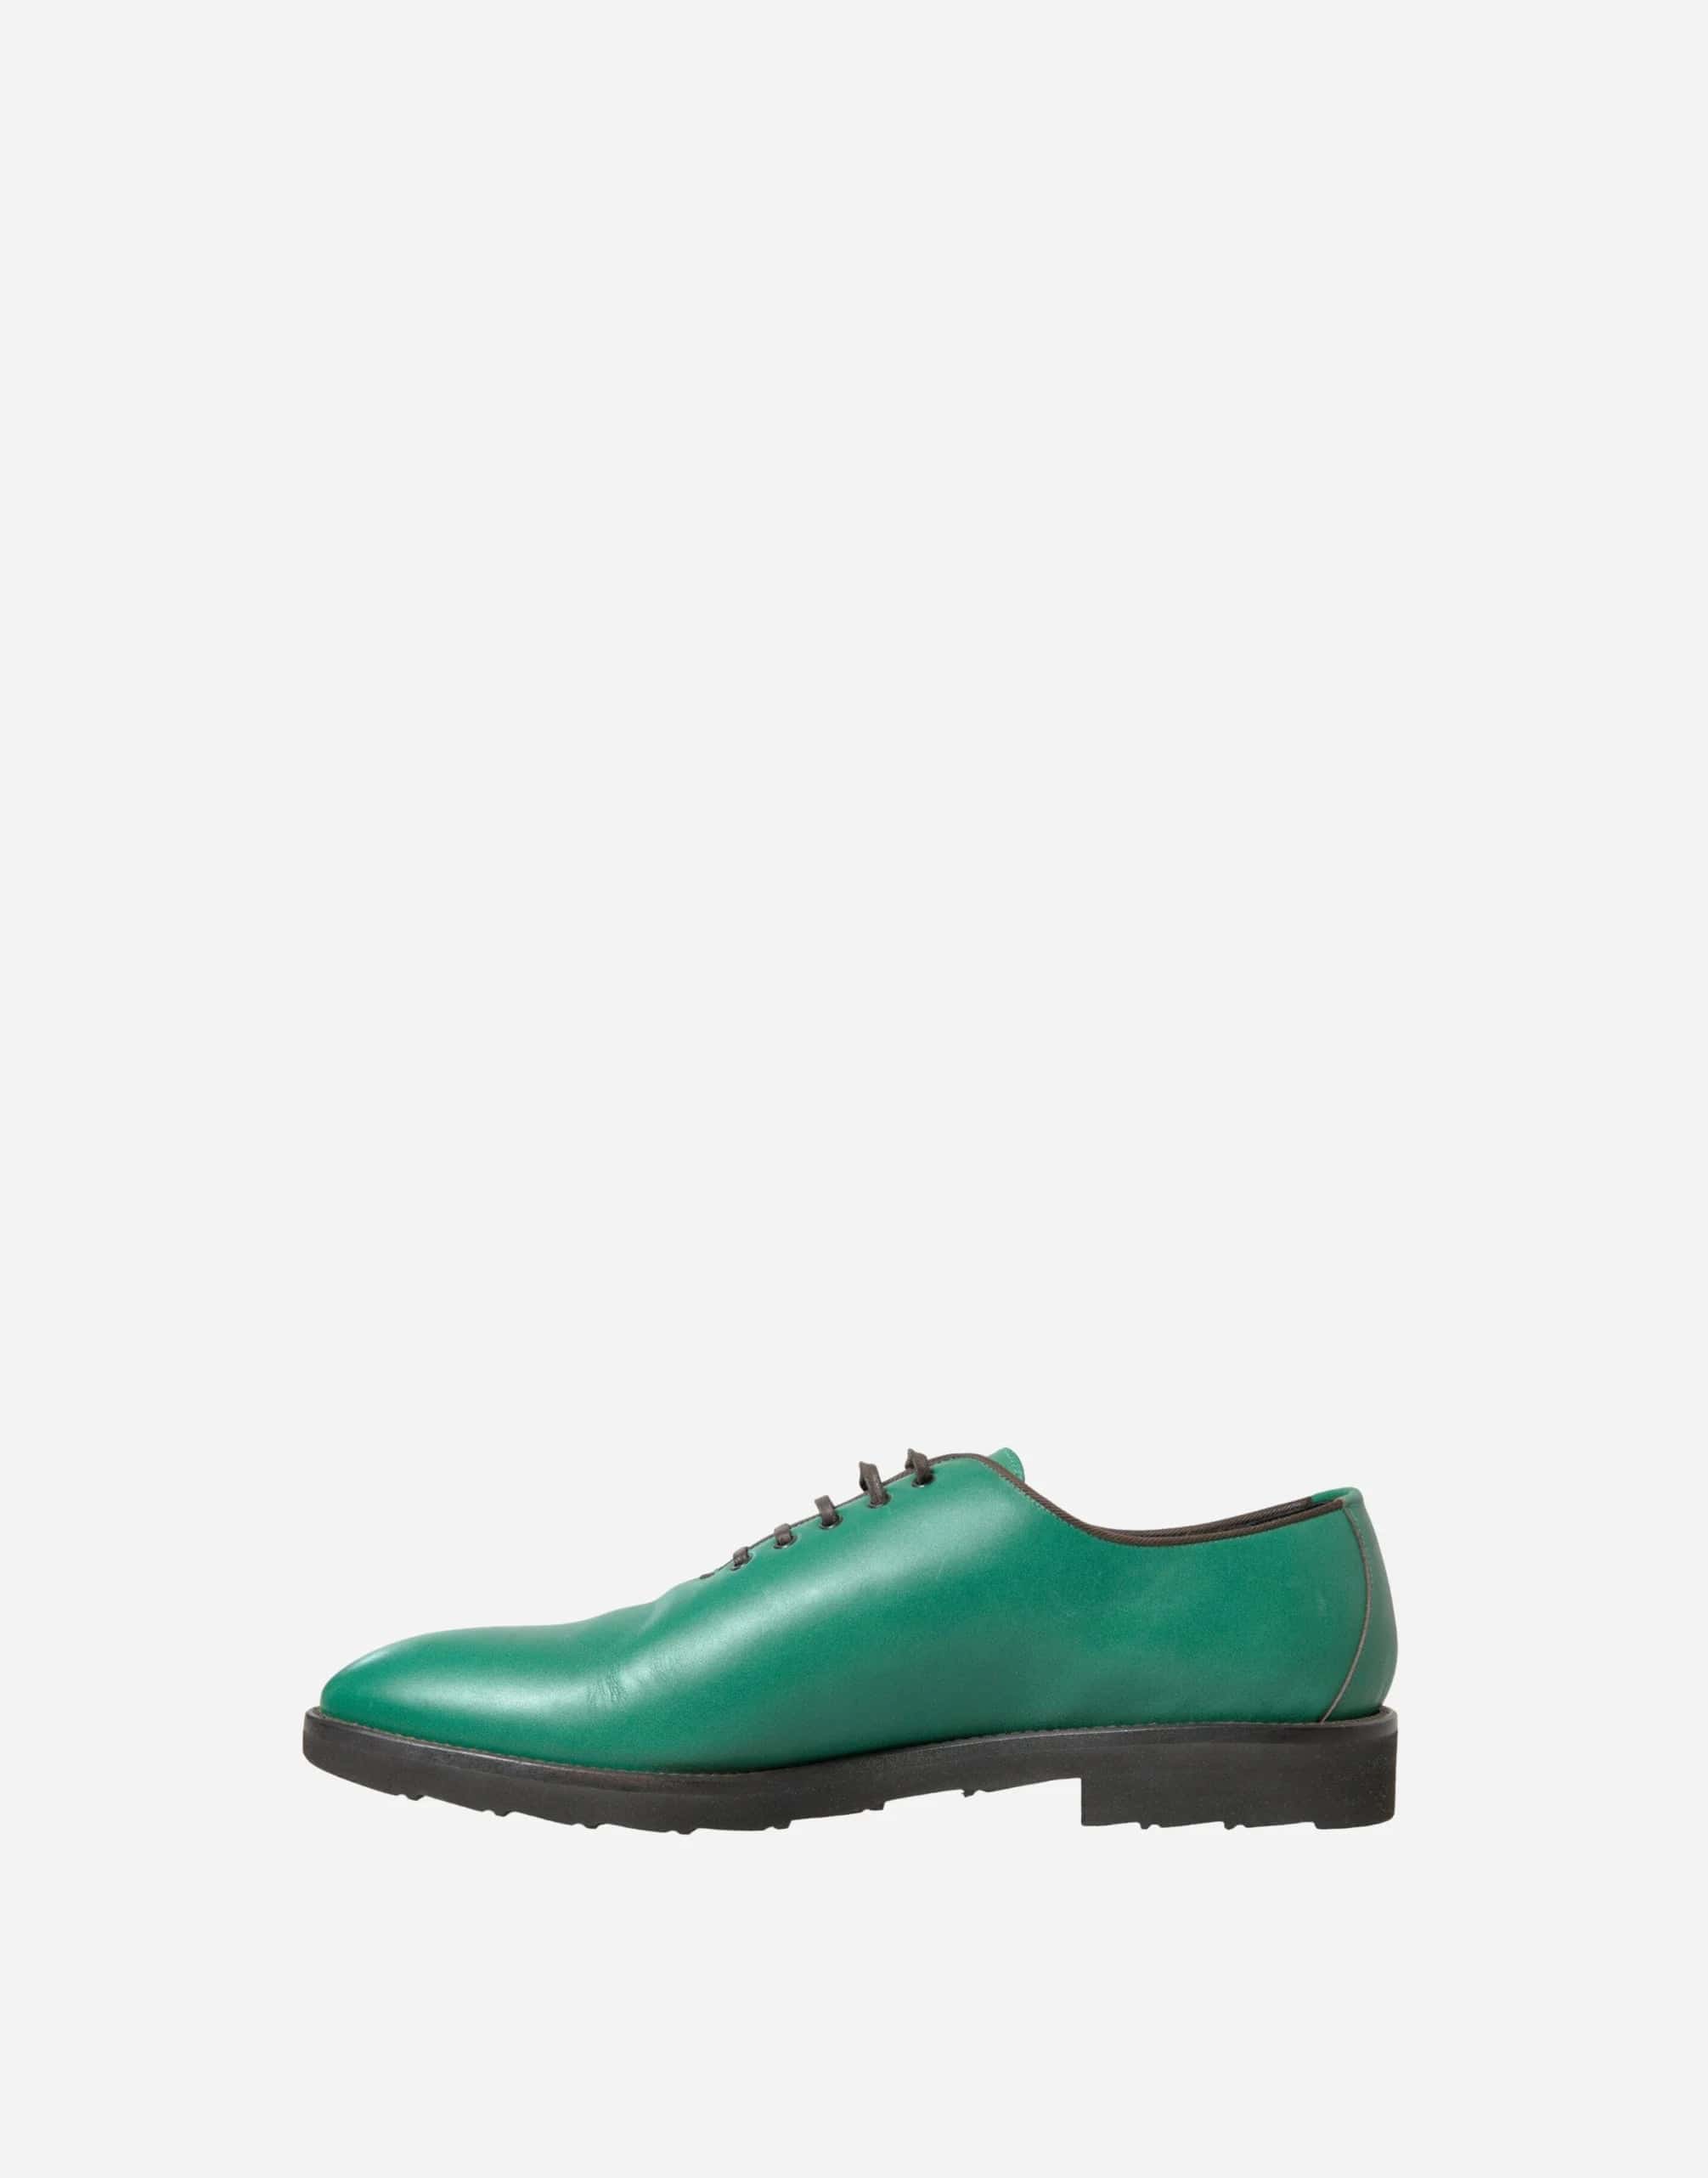 Oxford Lace Up Dress Shoes